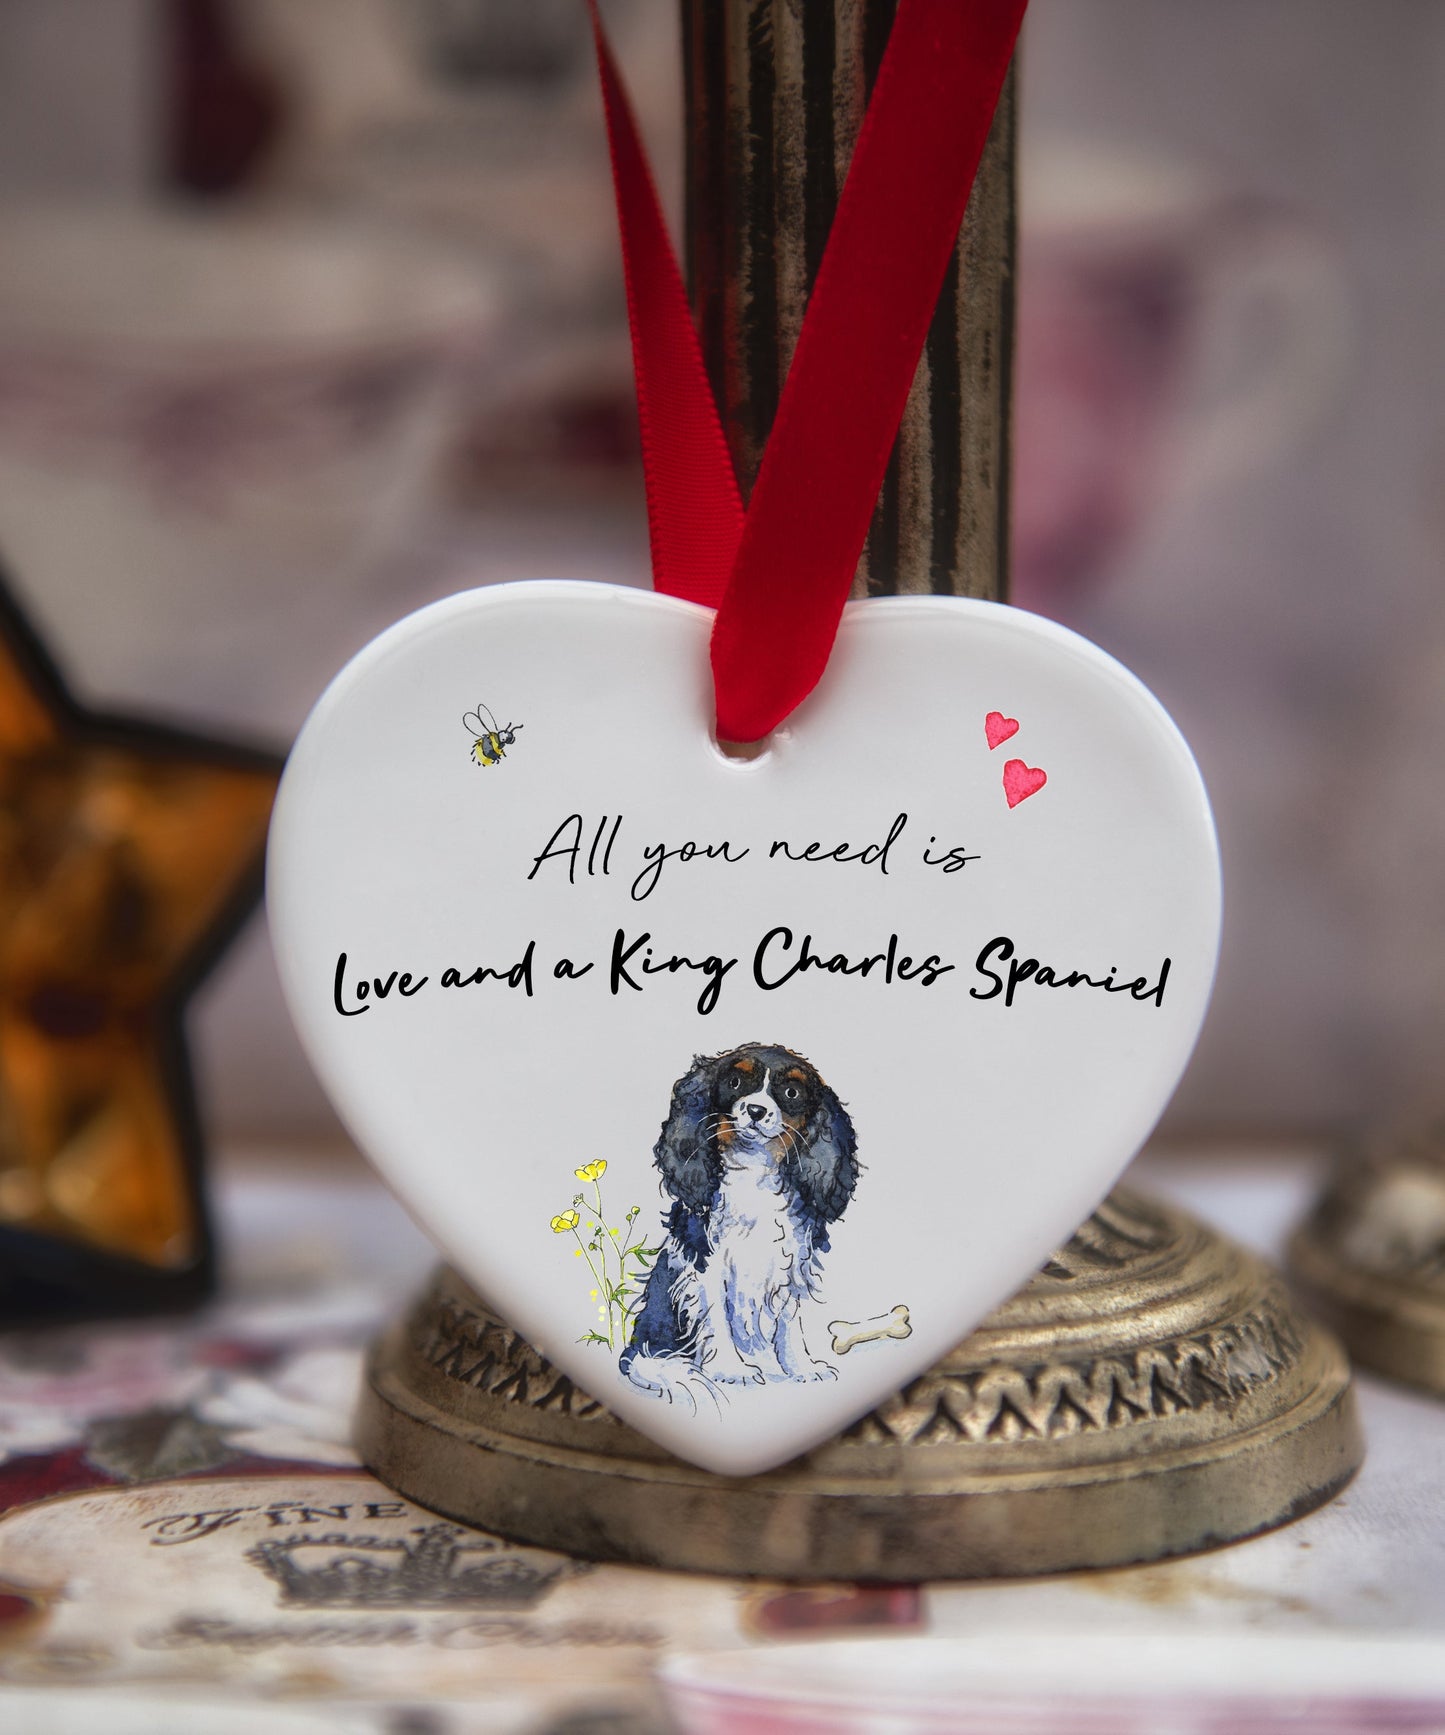 Love and a King Charles Spaniel Ceramic Heart